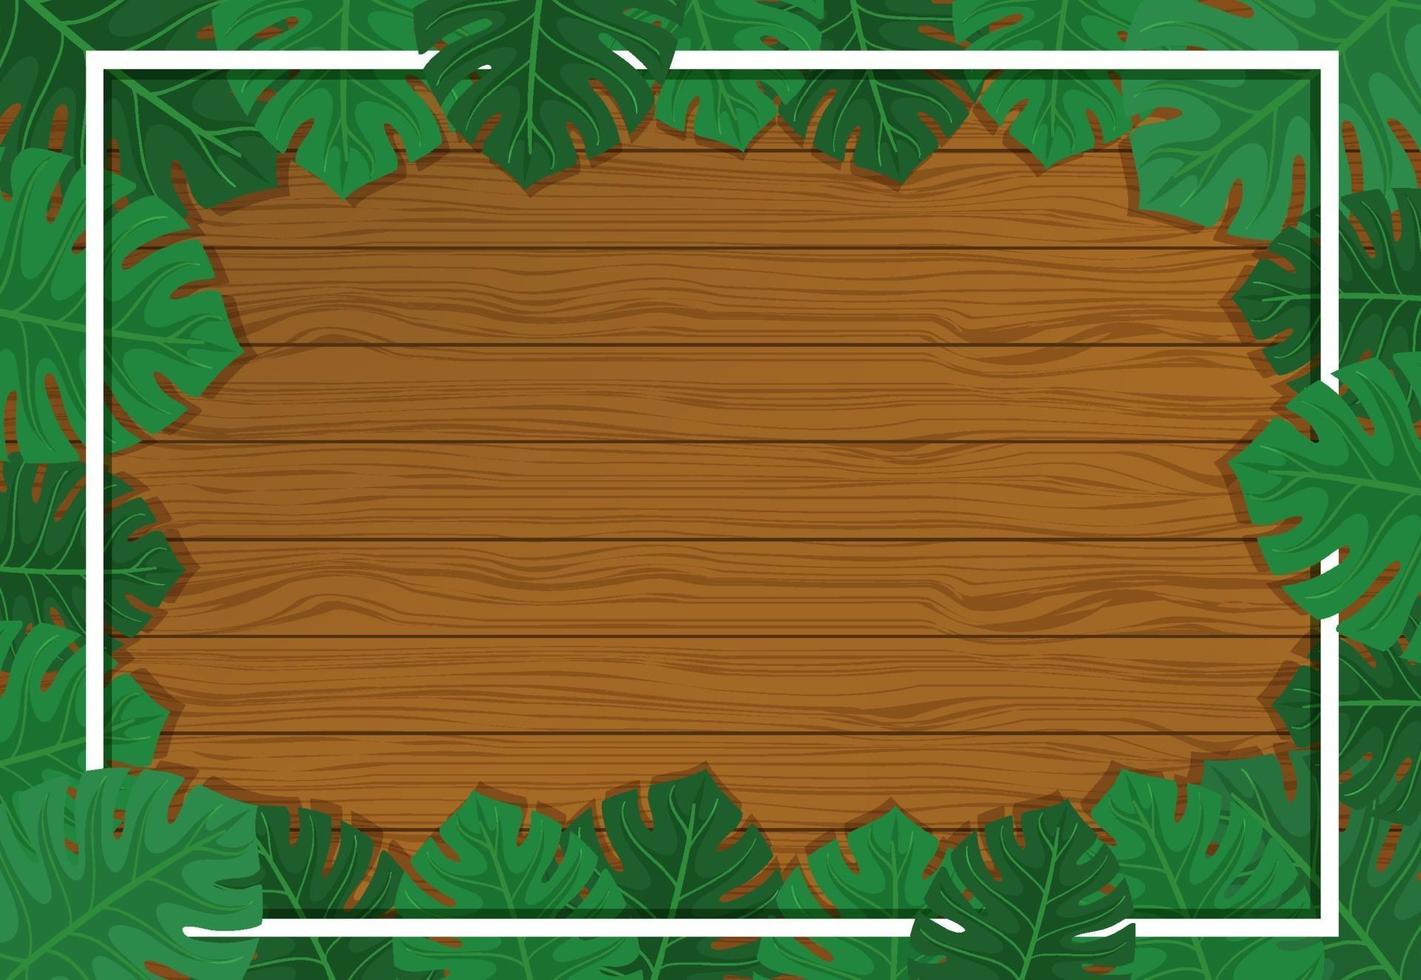 Empty wooden background with monstera leaves elements vector